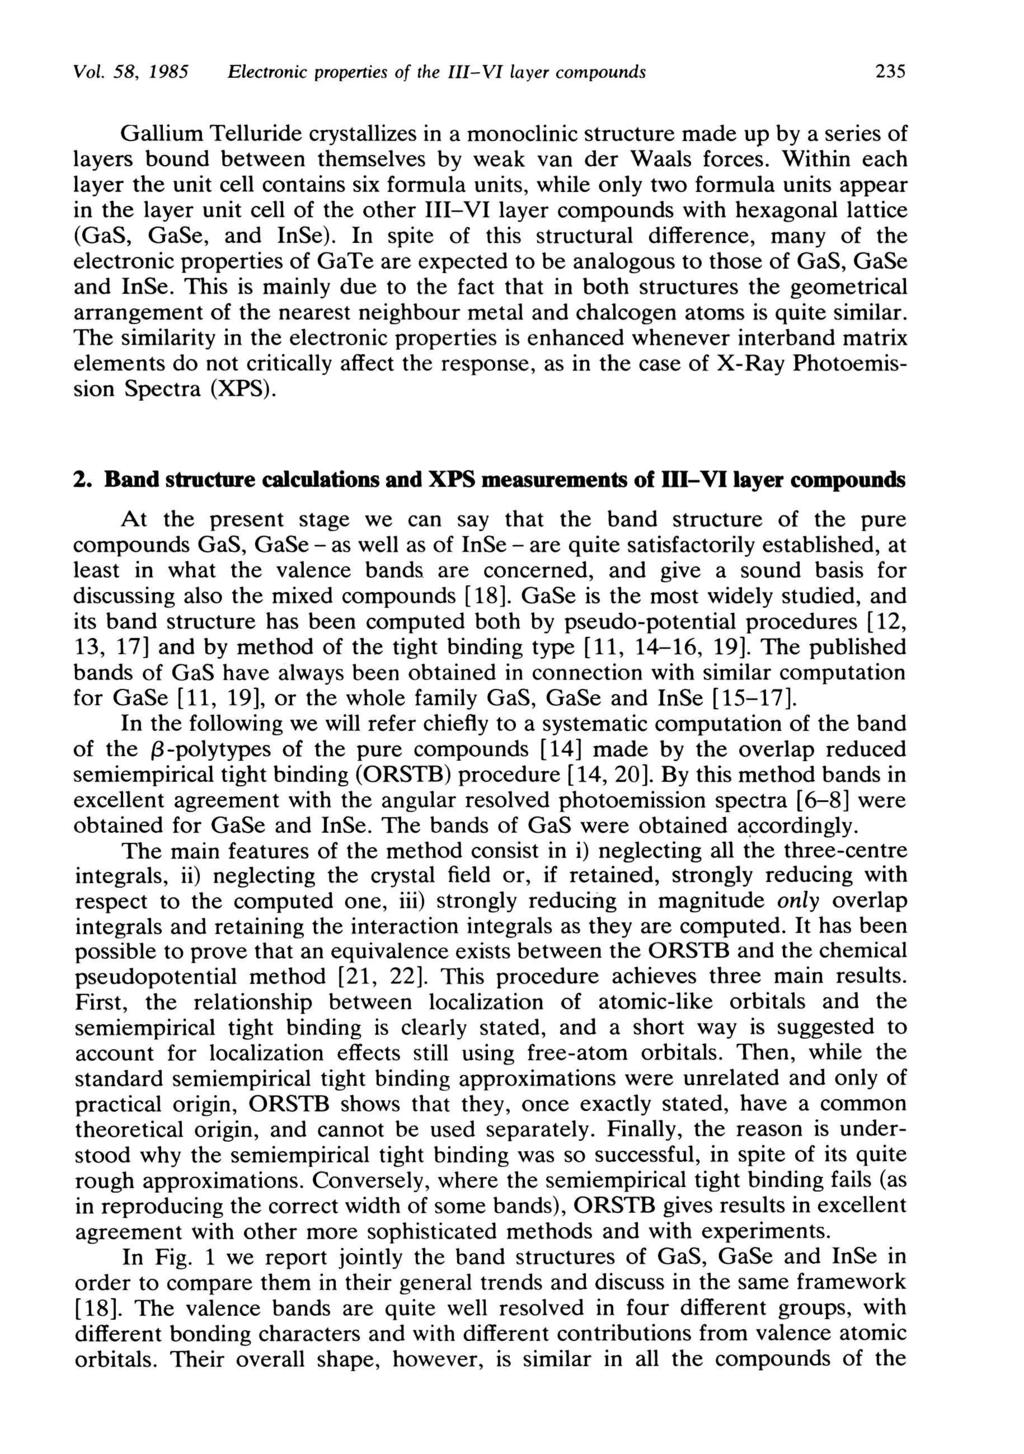 Vol. 58, 1985 Electronic properties of the III-VI layer compounds 235 Gallium Telluride crystallizes in a monoclinic structure made up by a series of layers bound between themselves by weak van der